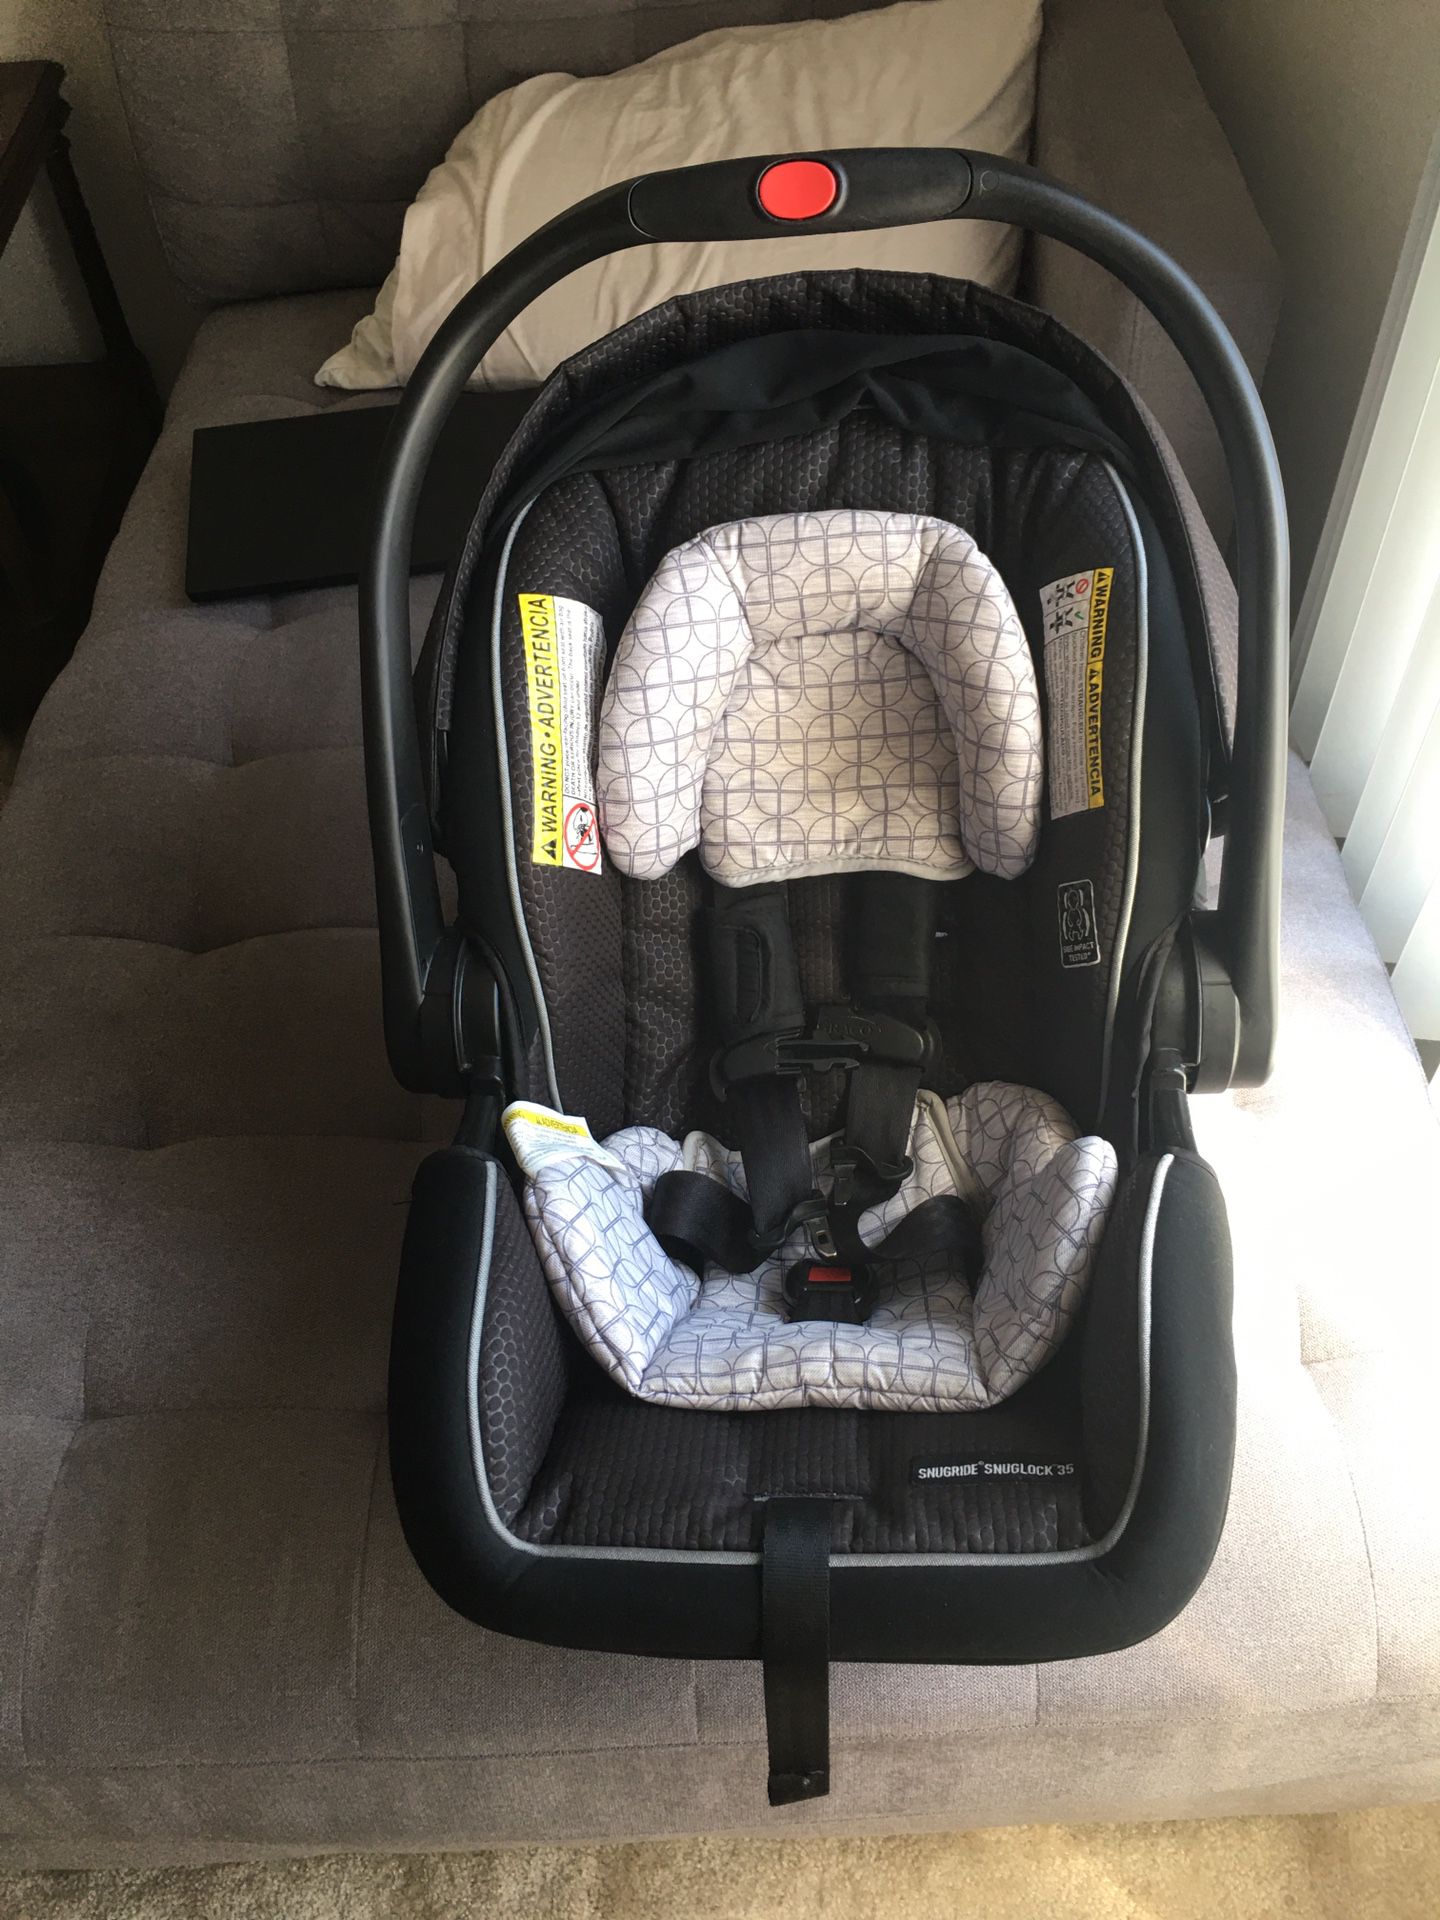 Graco Infant stroller and car seat